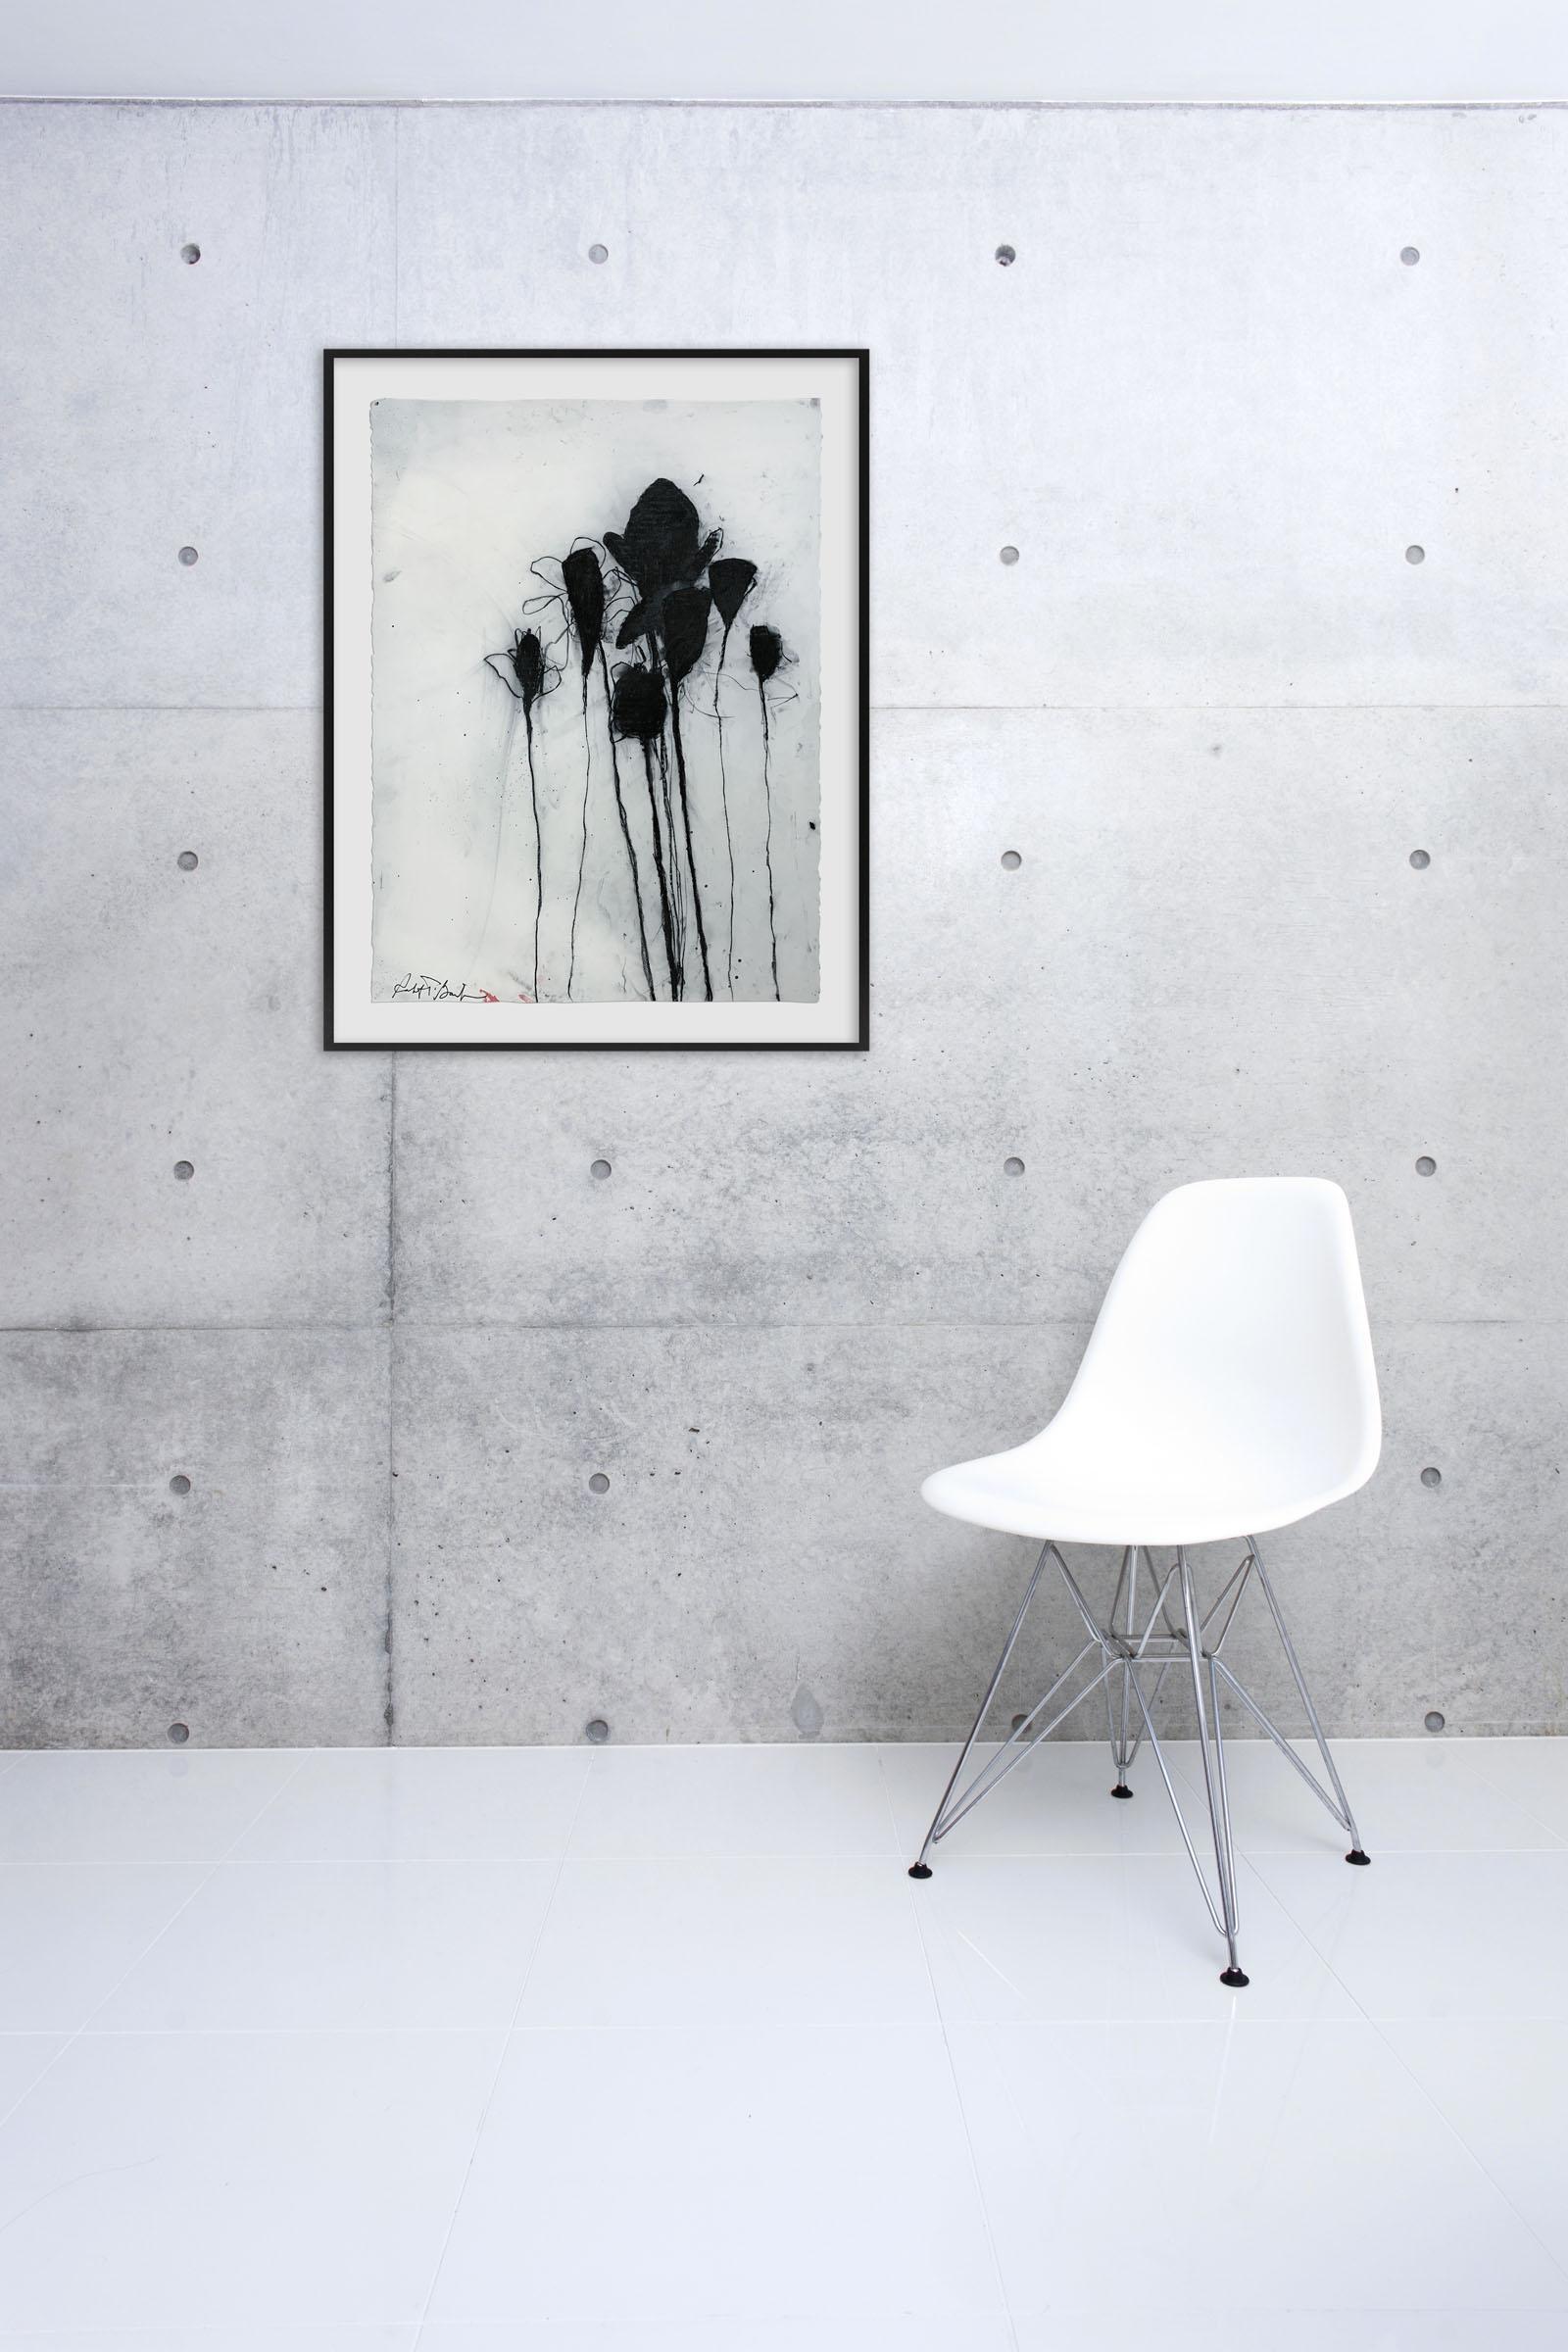 Multiple Stems in Black (Abstract painting) - Art by Robert Baribeau